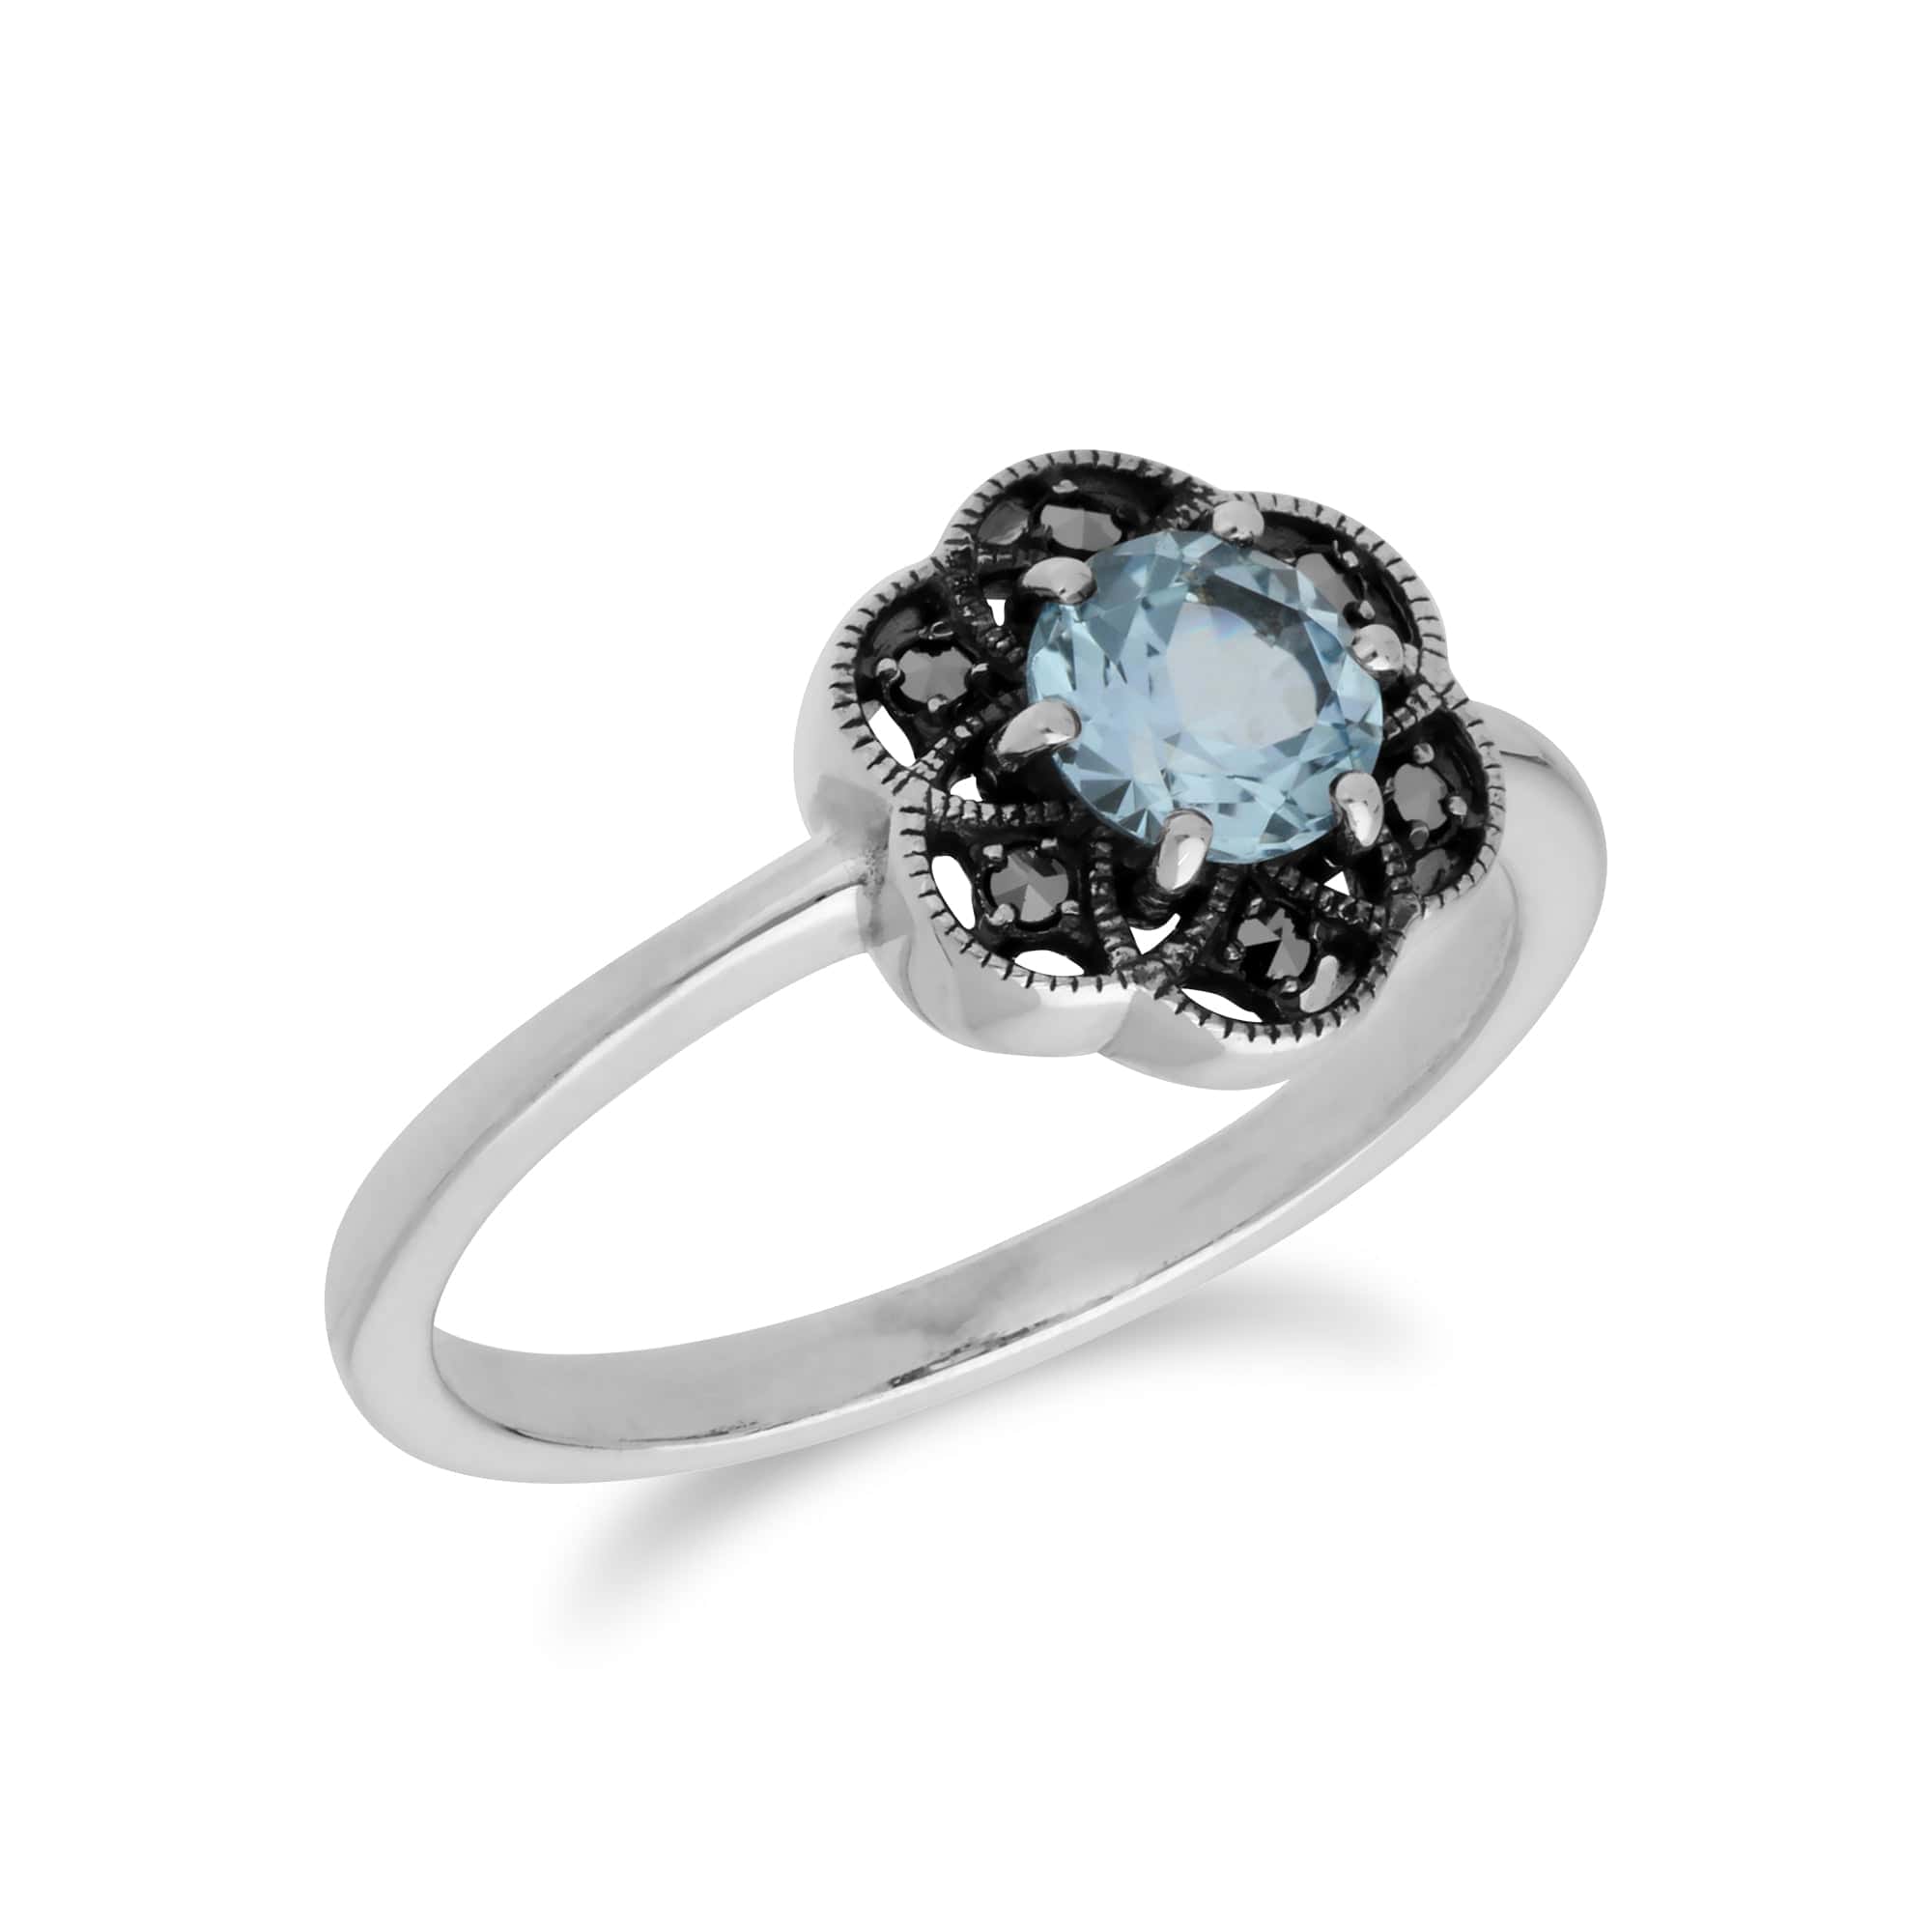 Floral Round Blue Topaz & Marcasite Daisy Ring in 925 Sterling Silver - Gemondo